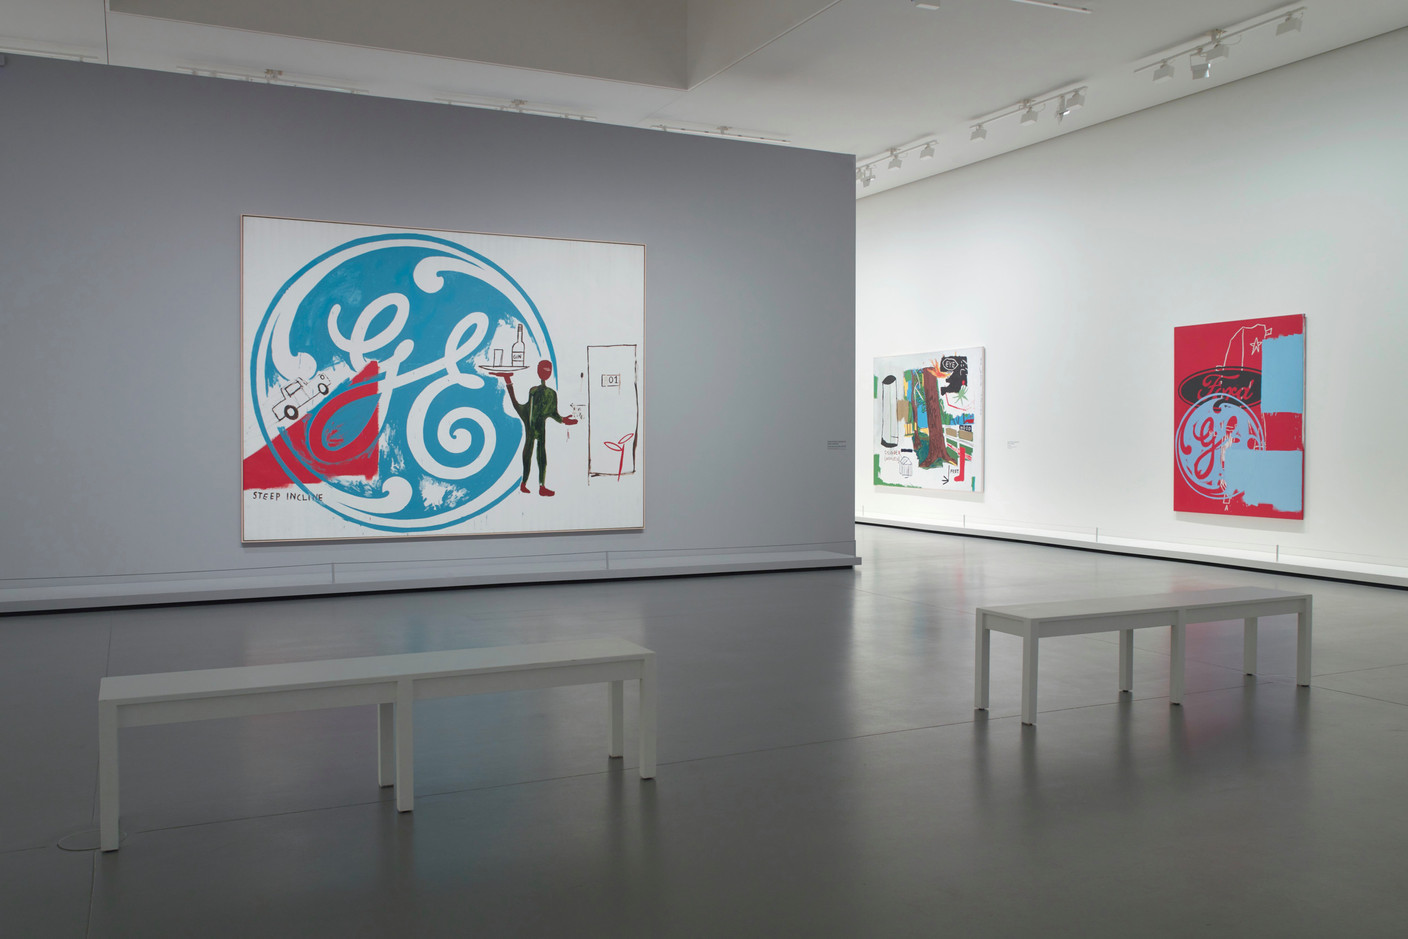 View of the Basquiat × Warhol: Painting four hands exhibition at the Fondation Louis Vuitton, on display from 5 April to 28 August 2023. On the left is General Electric with Waiter. Recognisable logos such as those of General Electric or Ford are visible in the artworks. © Estate of Jean-Michel Basquiat Licensed by Artestar, New York;© 2023 The Andy Warhol Foundation for the Visual Arts, Inc. / Licensed by ADAGP, Paris, © Fondation Louis Vuitton / Marc Domage